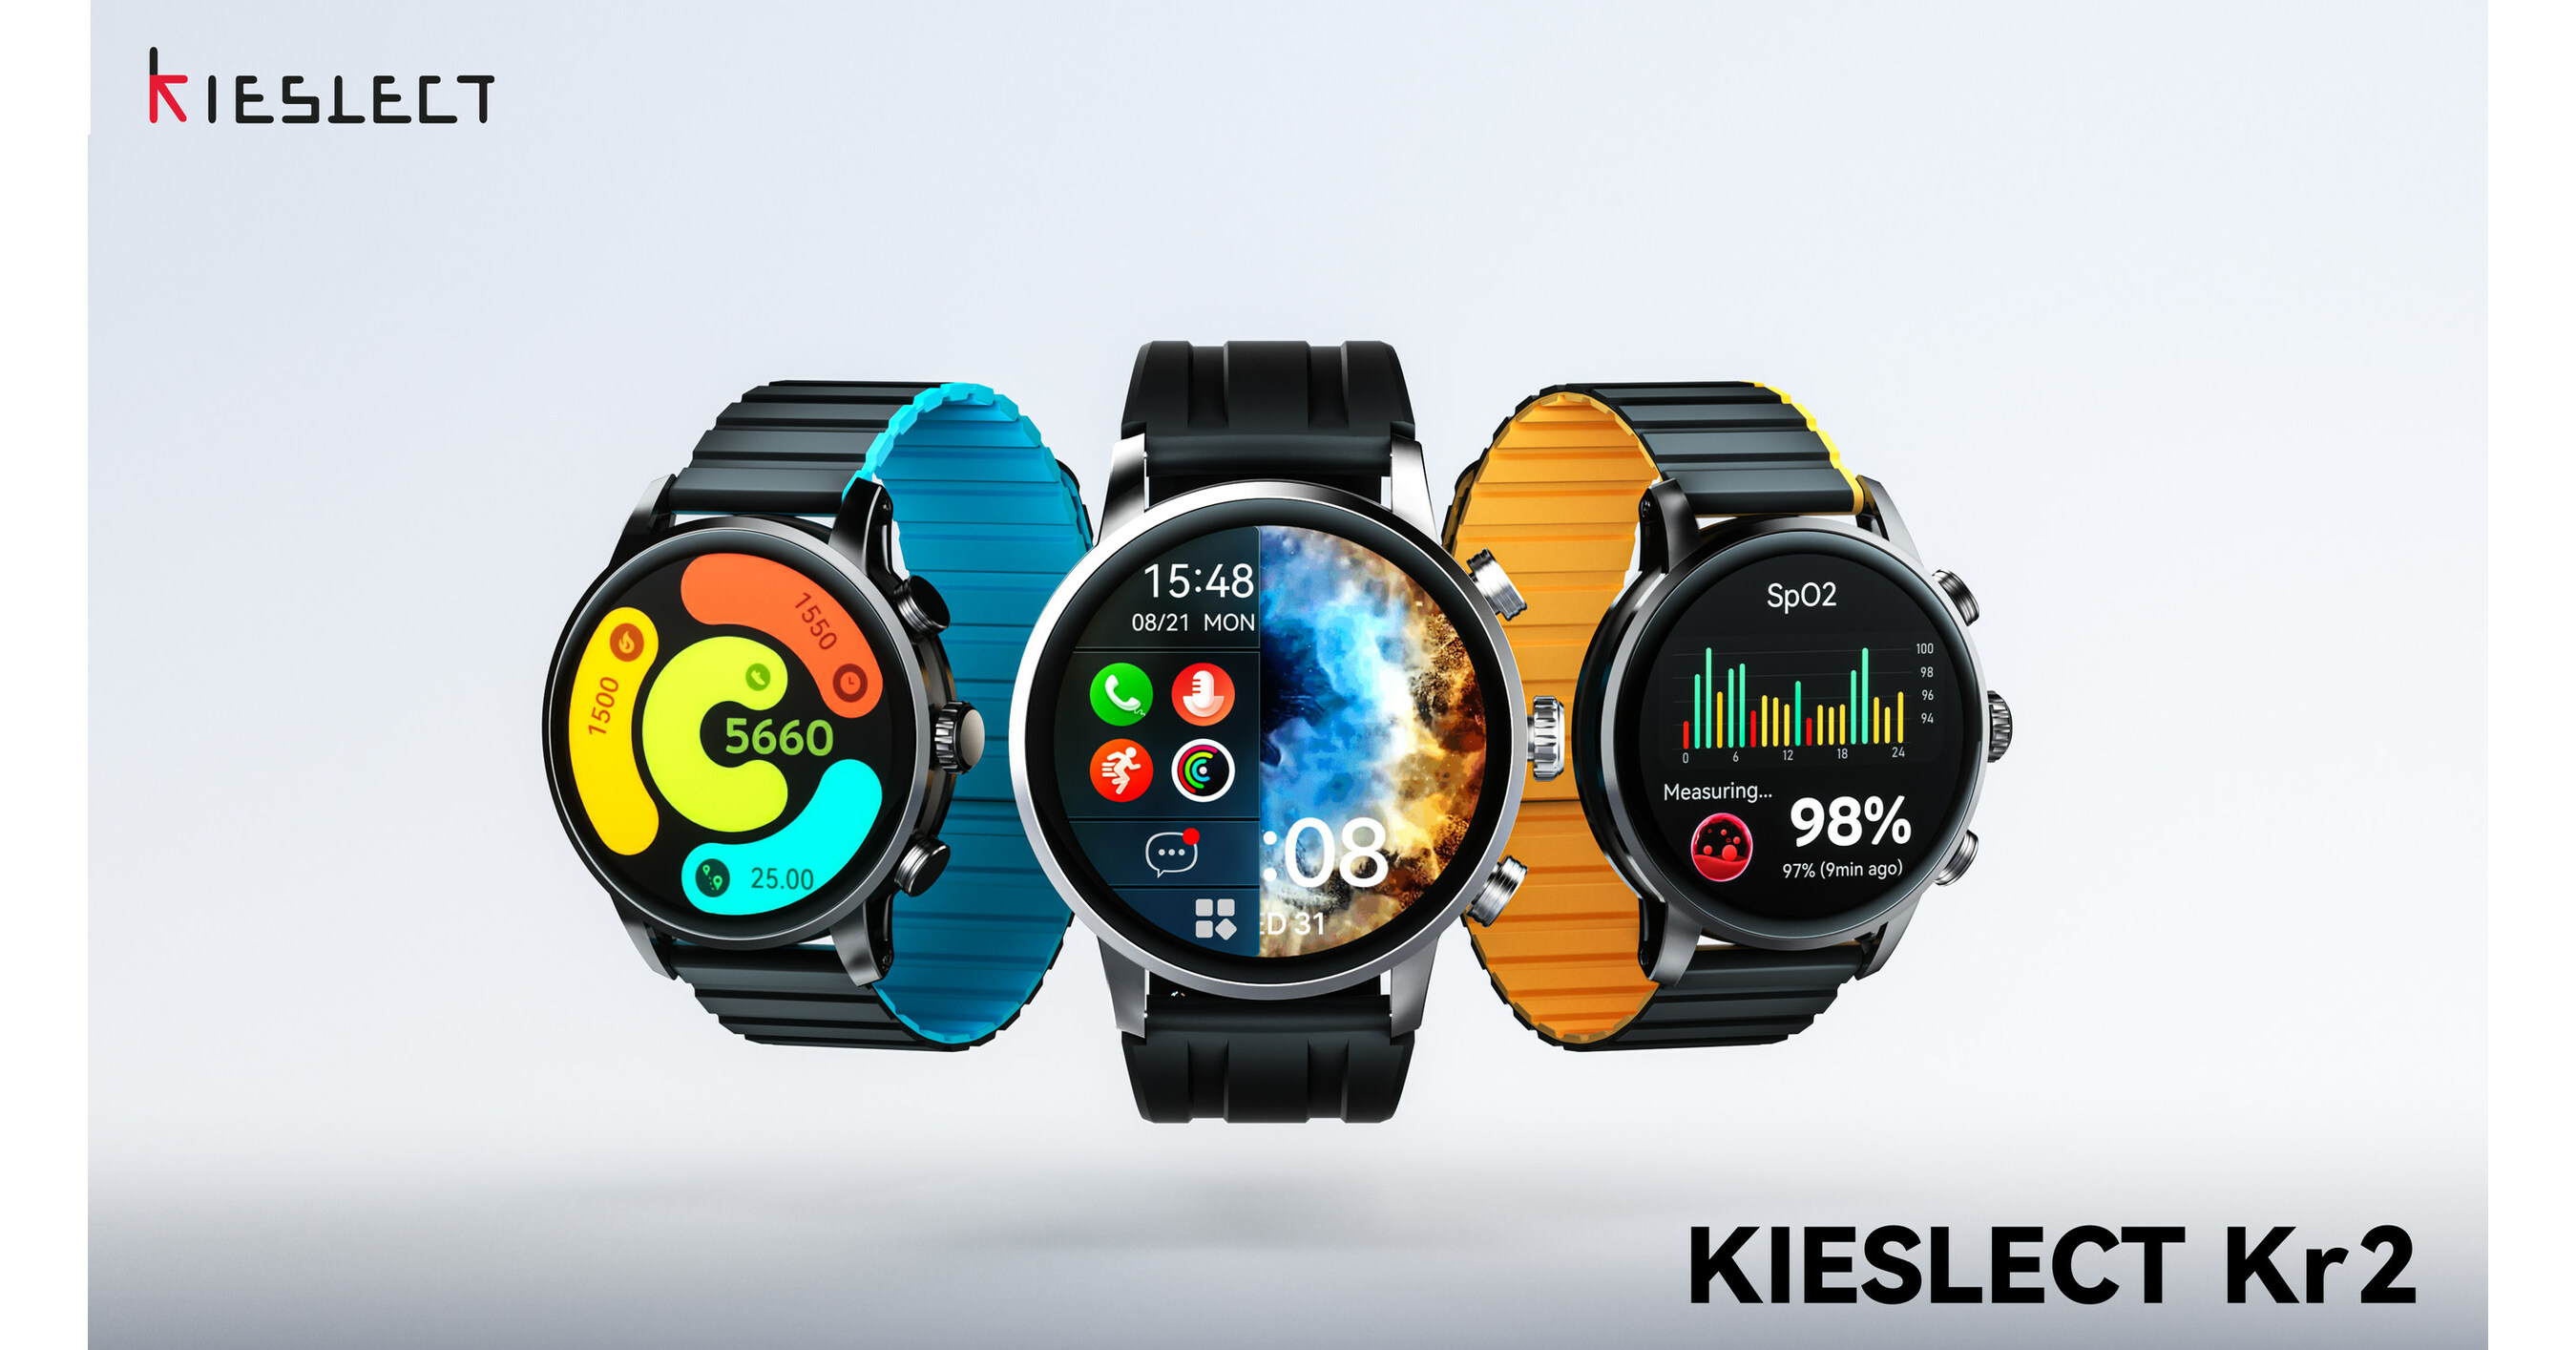 The Kieslect Kr2 Launches with "Dual Core, Triple Speed" Technology, a 2.5D  GPU Super Dynamic Display, and much, much more